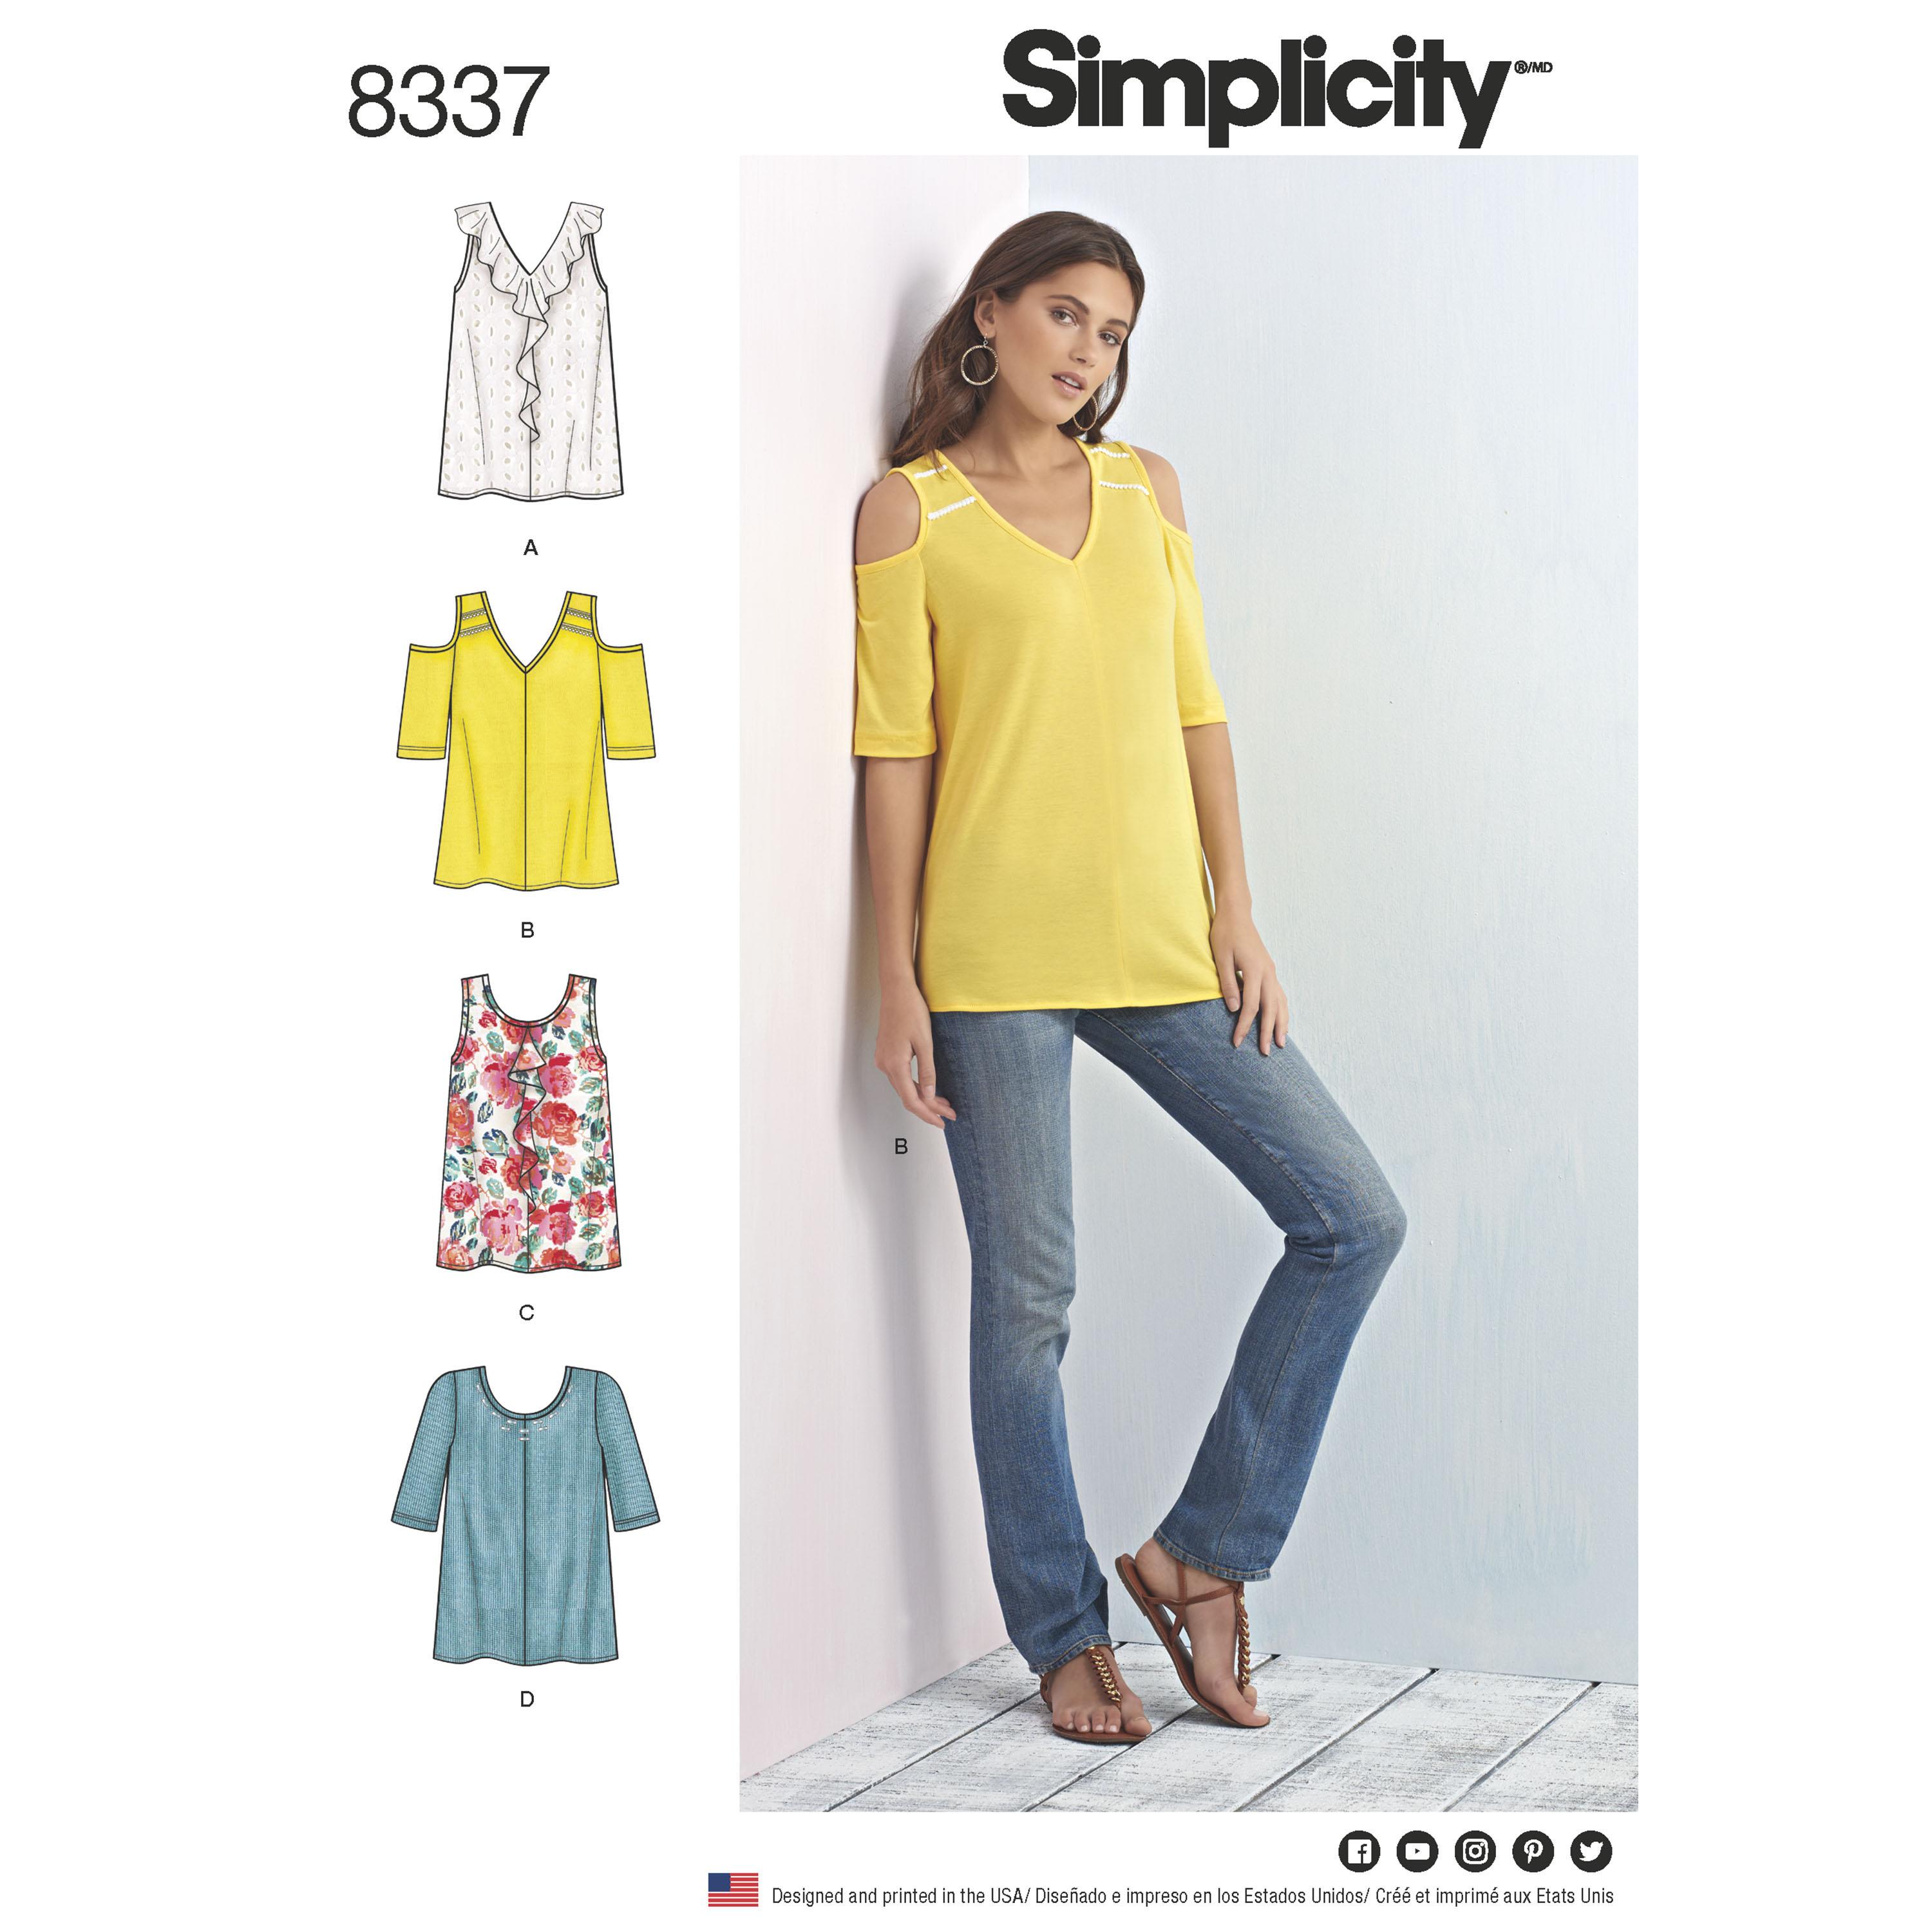 Simplicity S8337 Women's Knit Tops with Bodice and Sleeve Variations